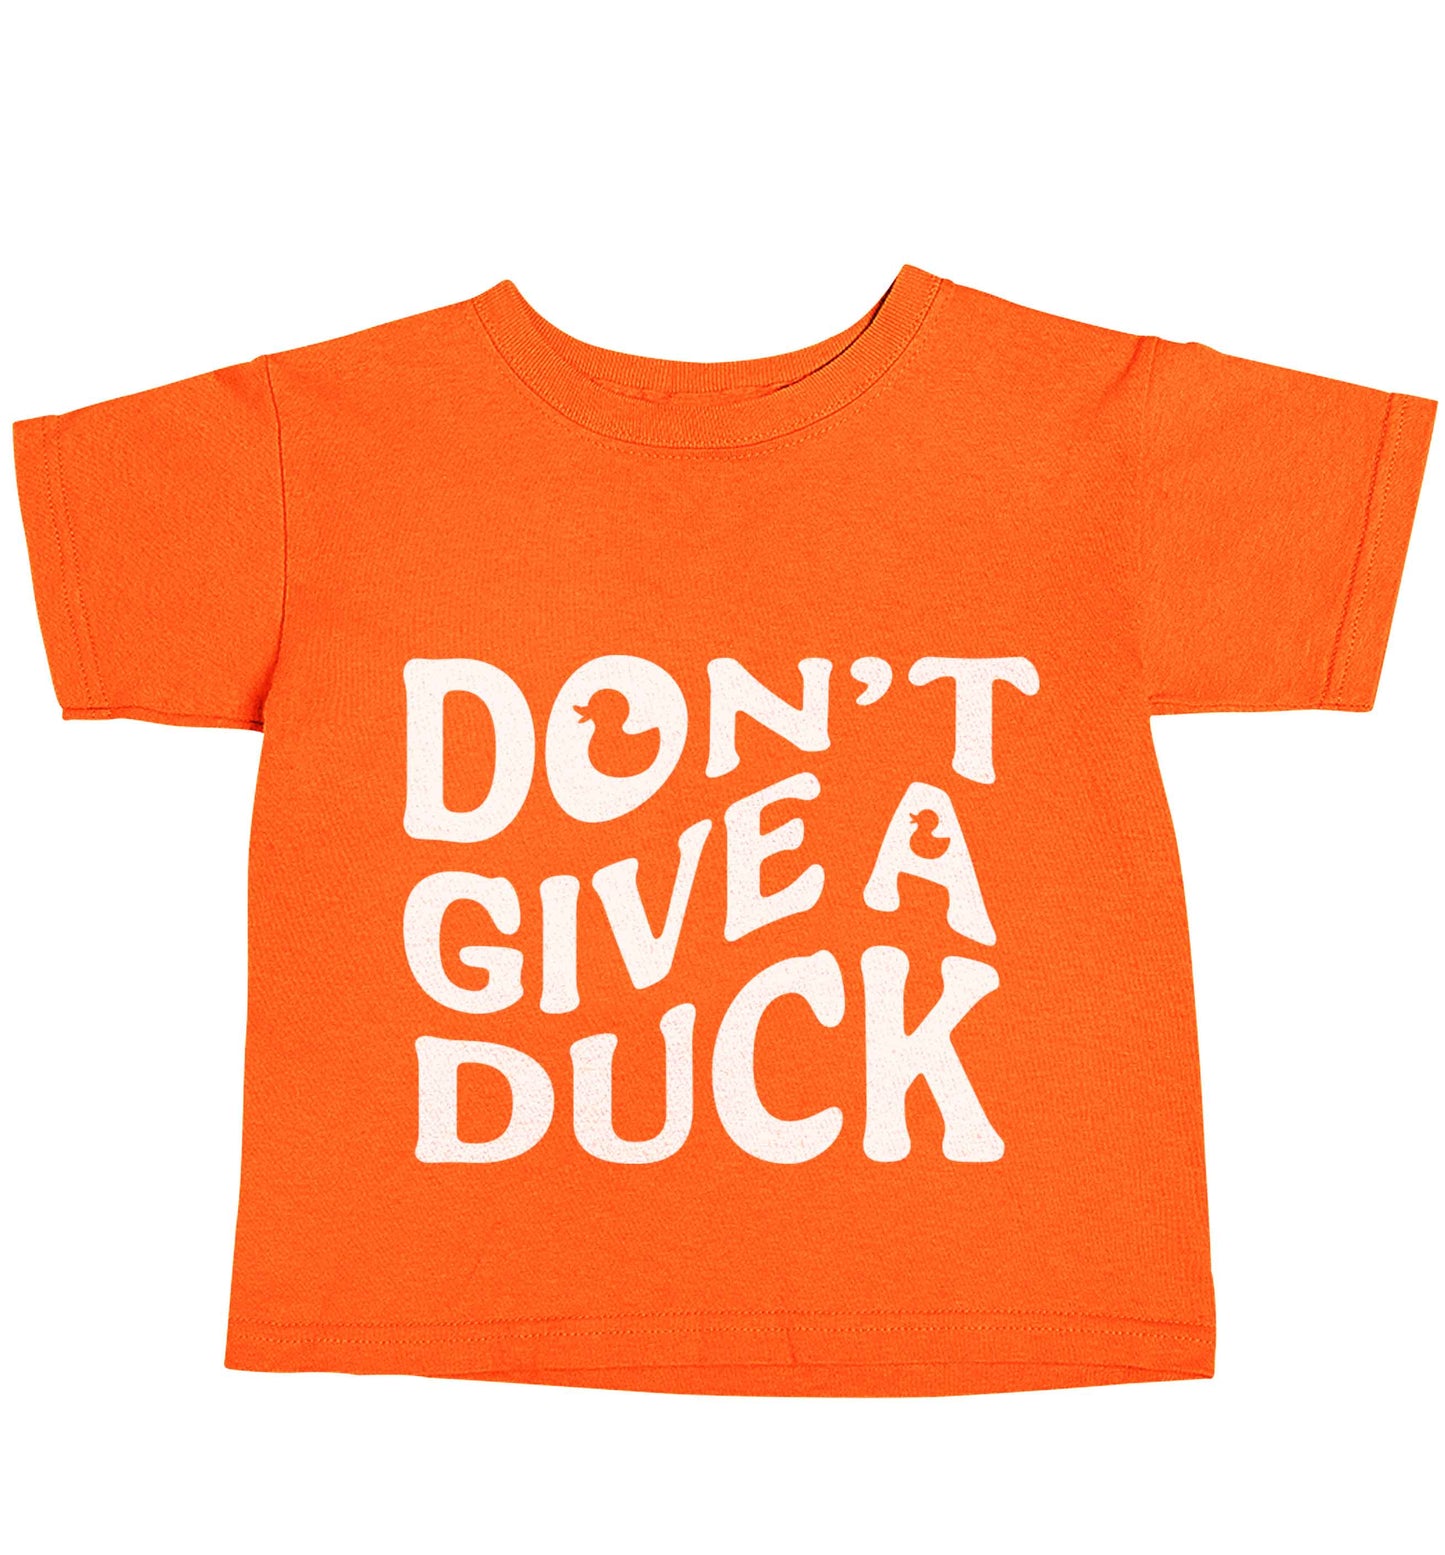 Don't give a duck orange baby toddler Tshirt 2 Years